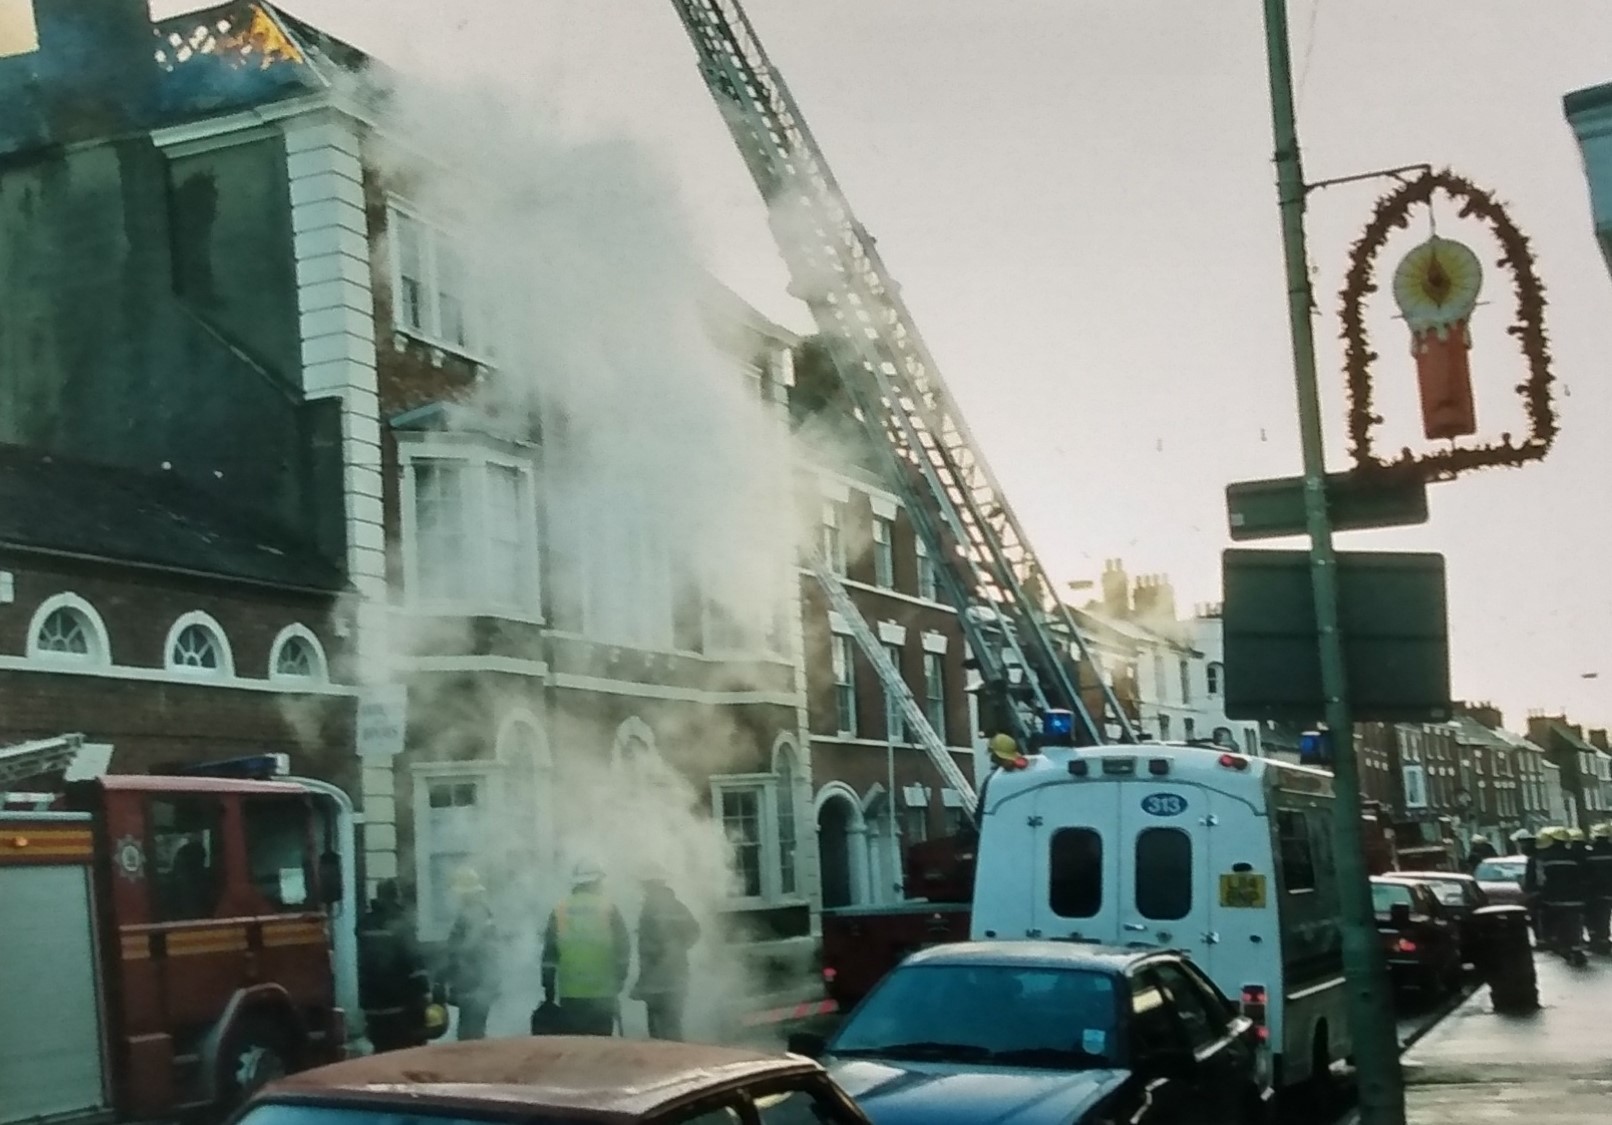 January 1999 and firefighters from across Worcestershire were drafted in to help tackle a blaze at Perrott House in Pershore’s Bridge Street